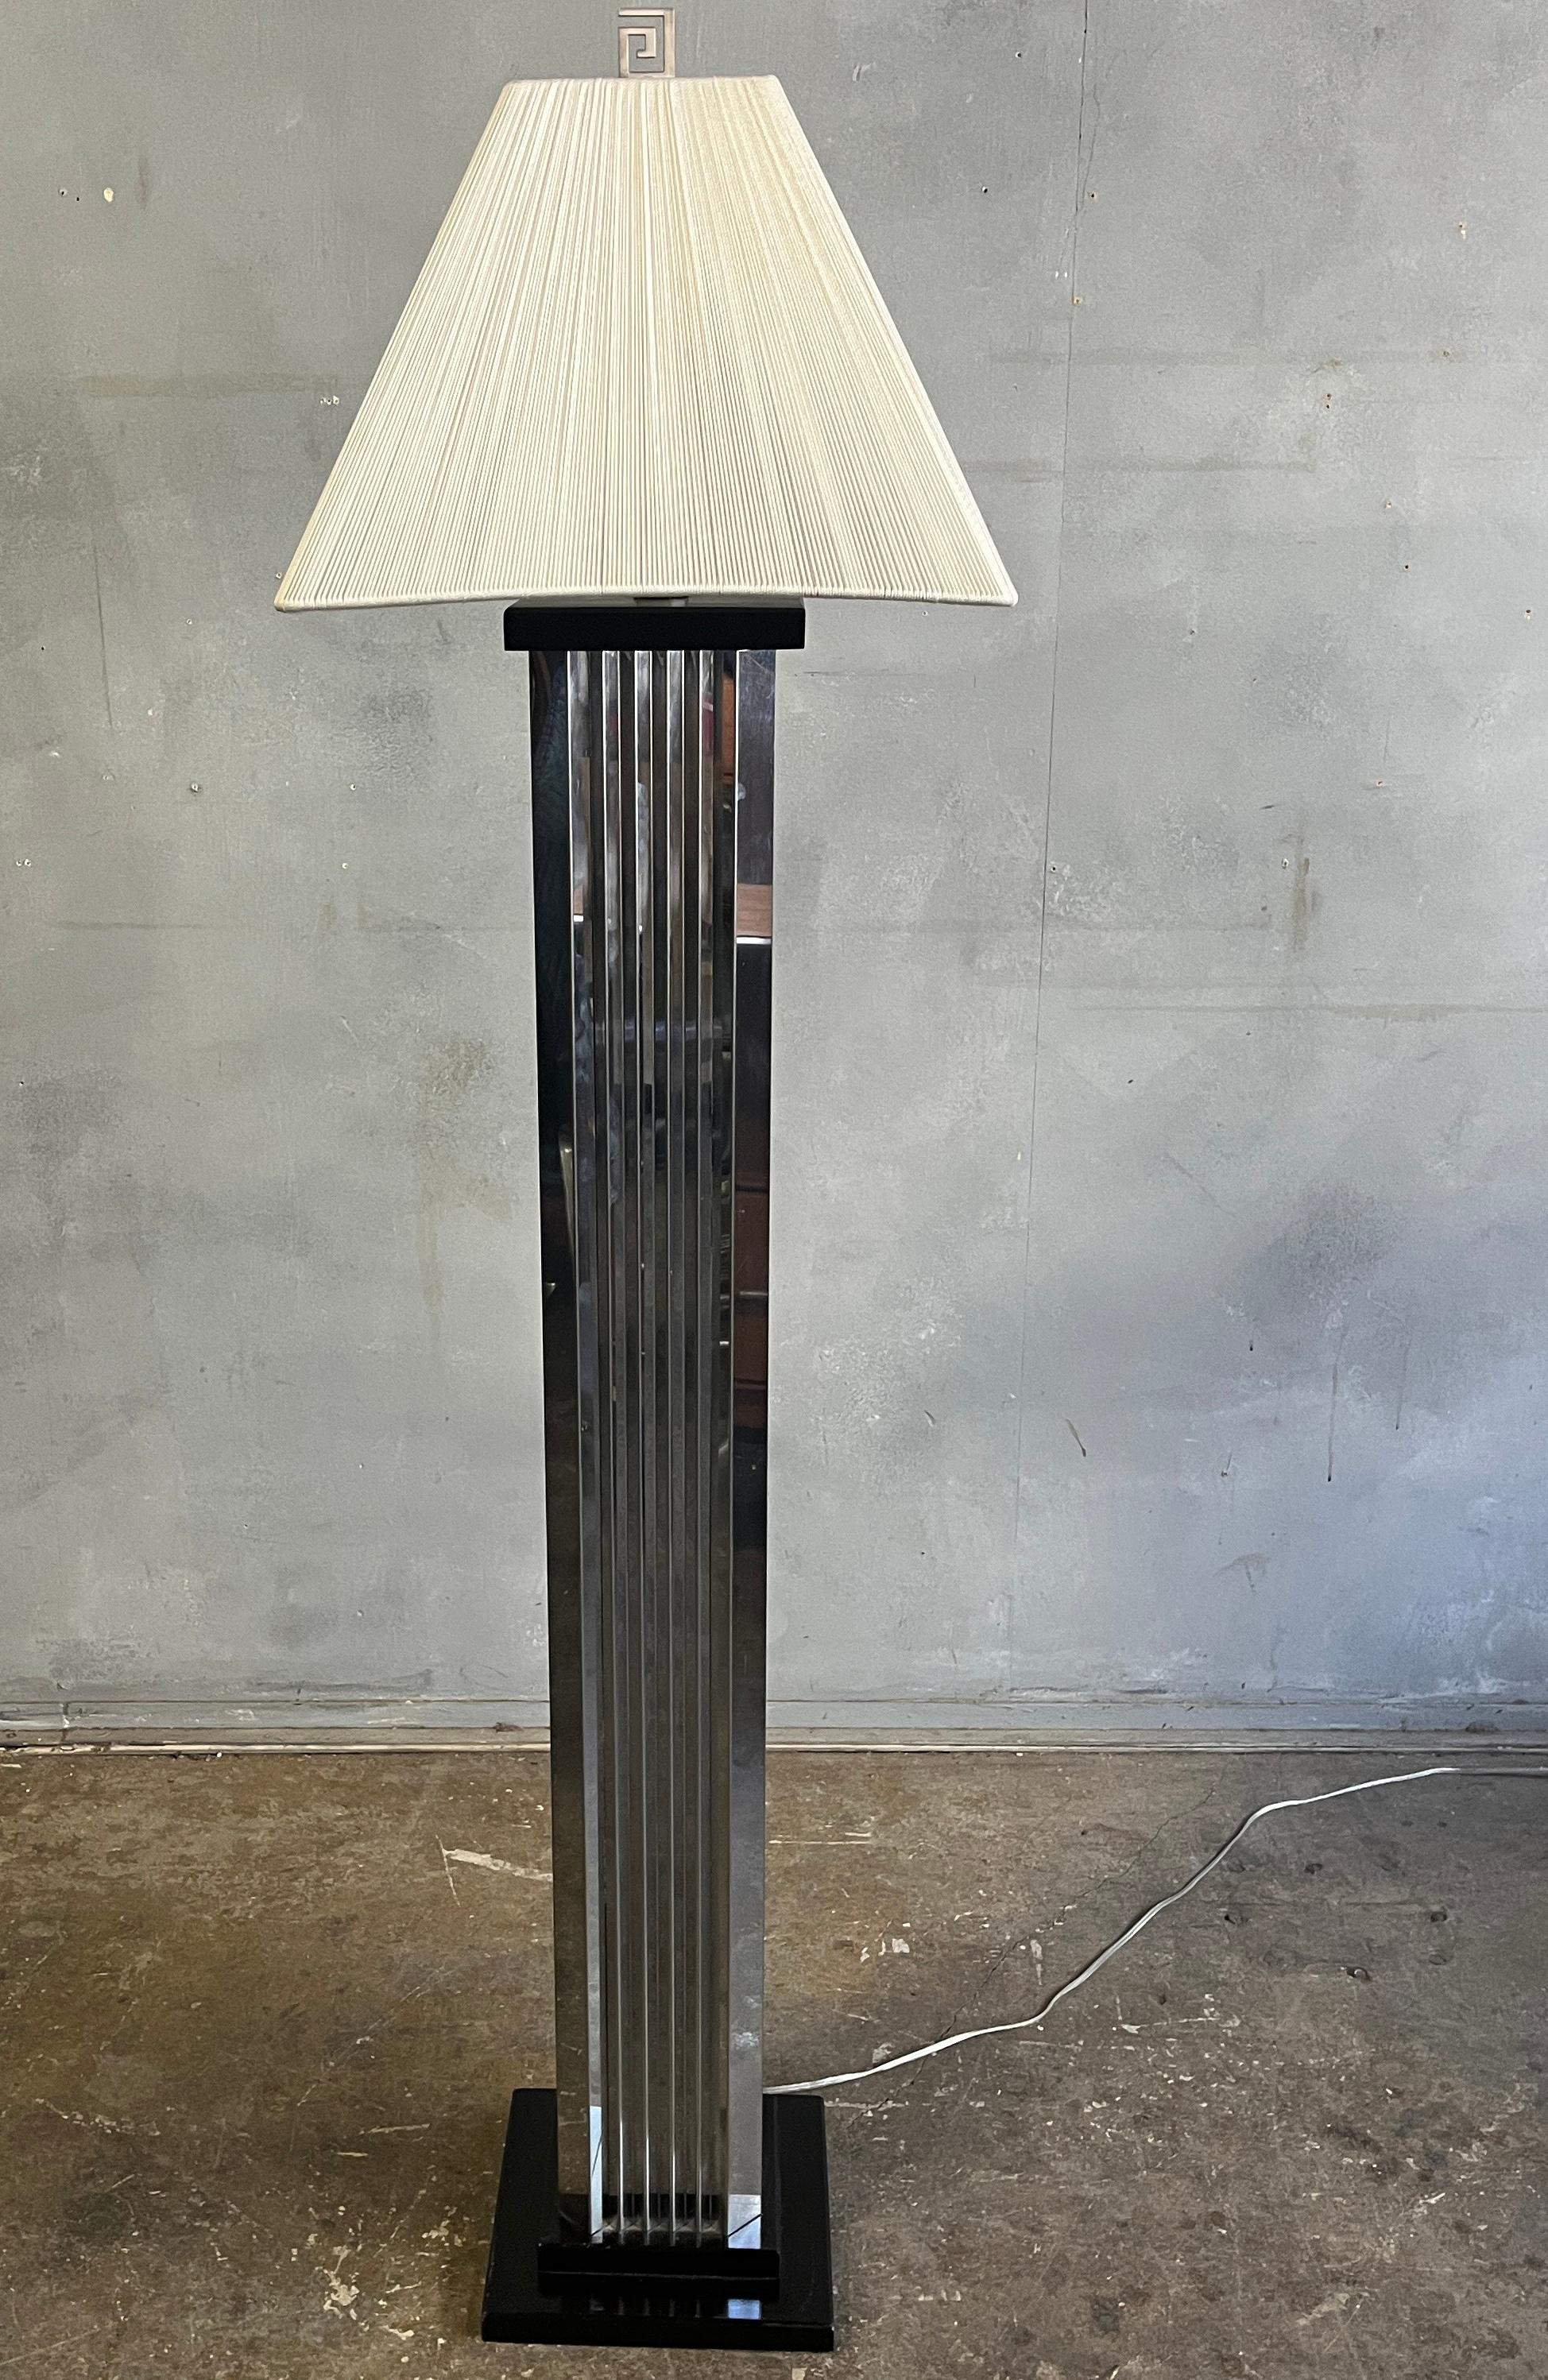 Vintage 1980s or 1970s Art Deco/Hollywood Regency floor lamp. This lamp has thin chrome metal panels with a mirrored finish in an accordion fold attached to an ebony lacquered base. We believe the shade is made of silk strings. Silvered hardware.